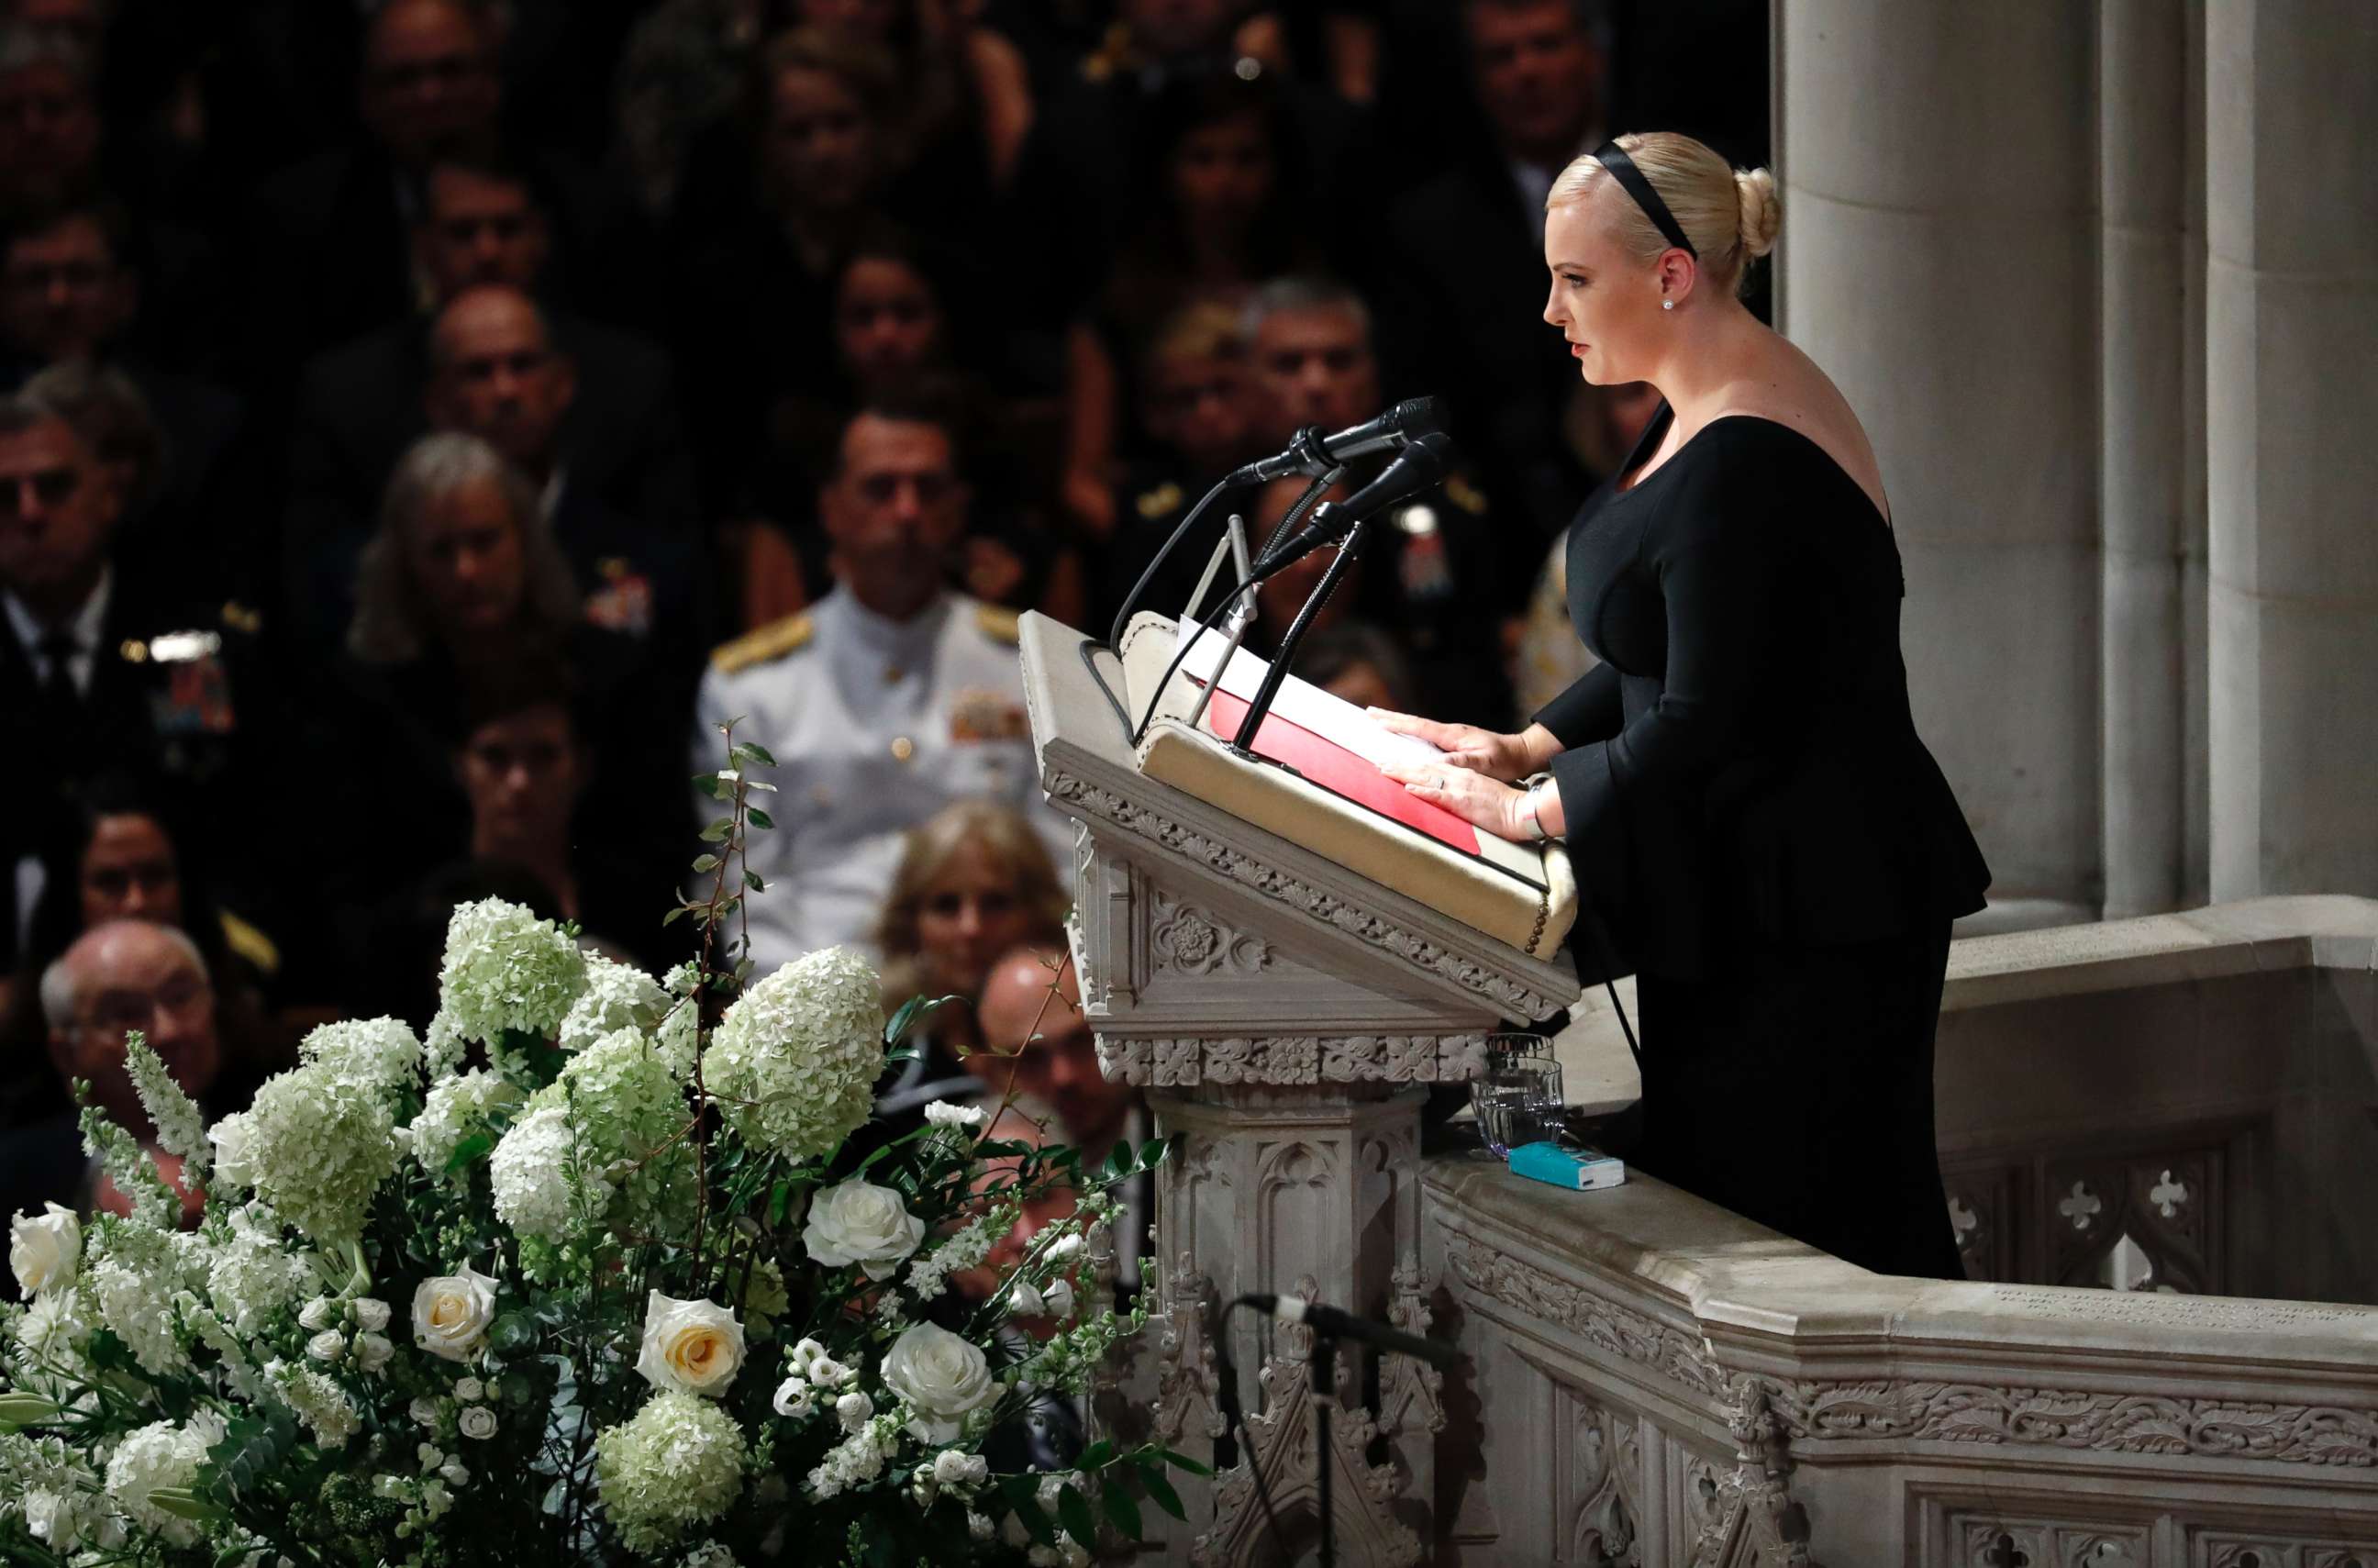 PHOTO: Meghan McCain speaks at a memorial services for her father Sen. John McCain at Washington National Cathedral in Washington, Sept. 1, 2018.